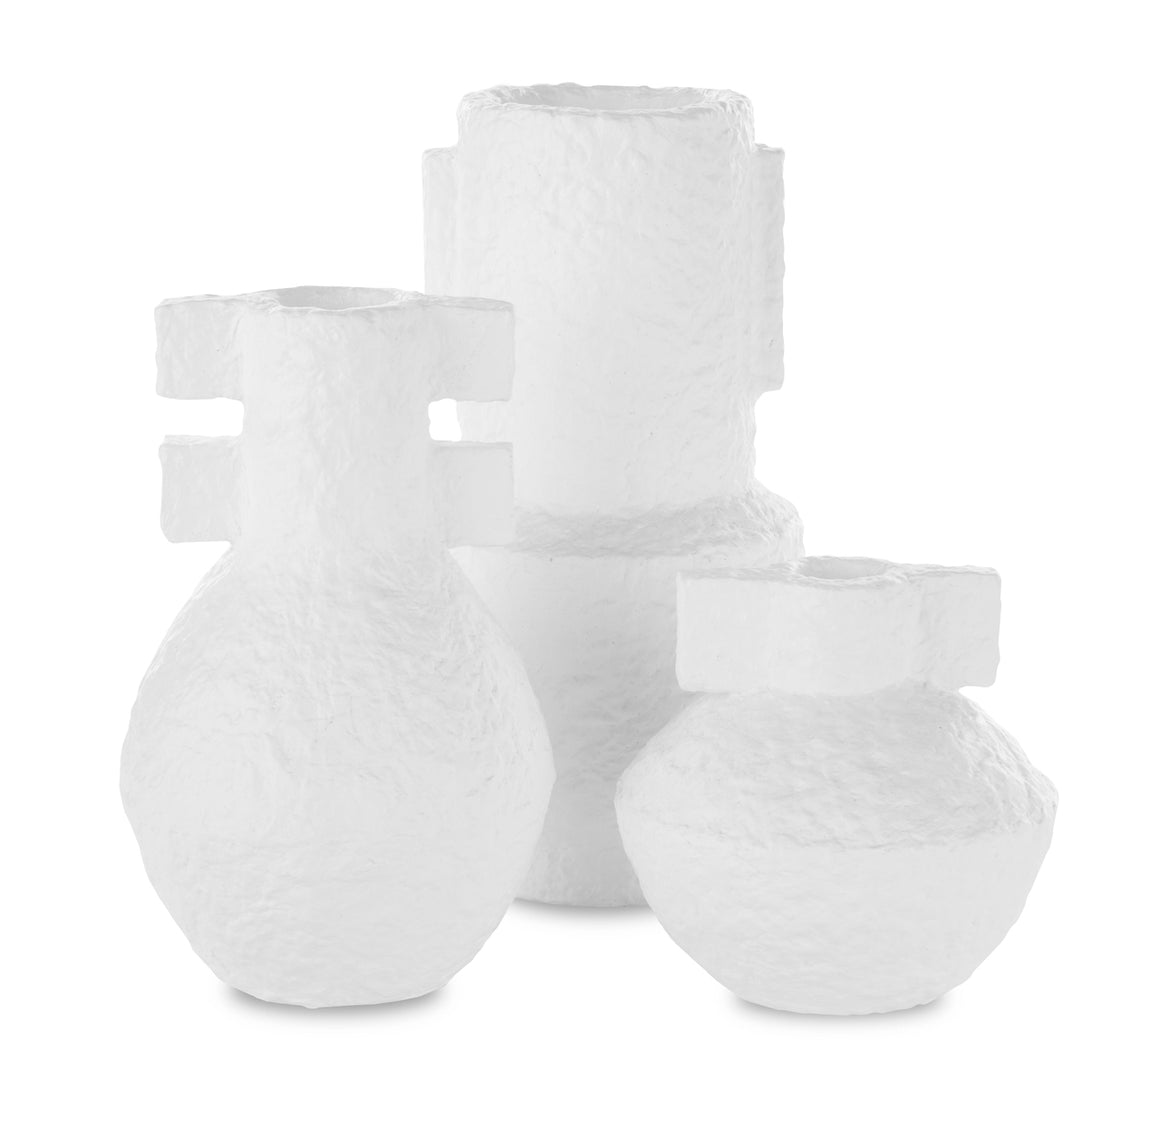 Currey and Company Aegean White Vase Set of 3 - Textured White